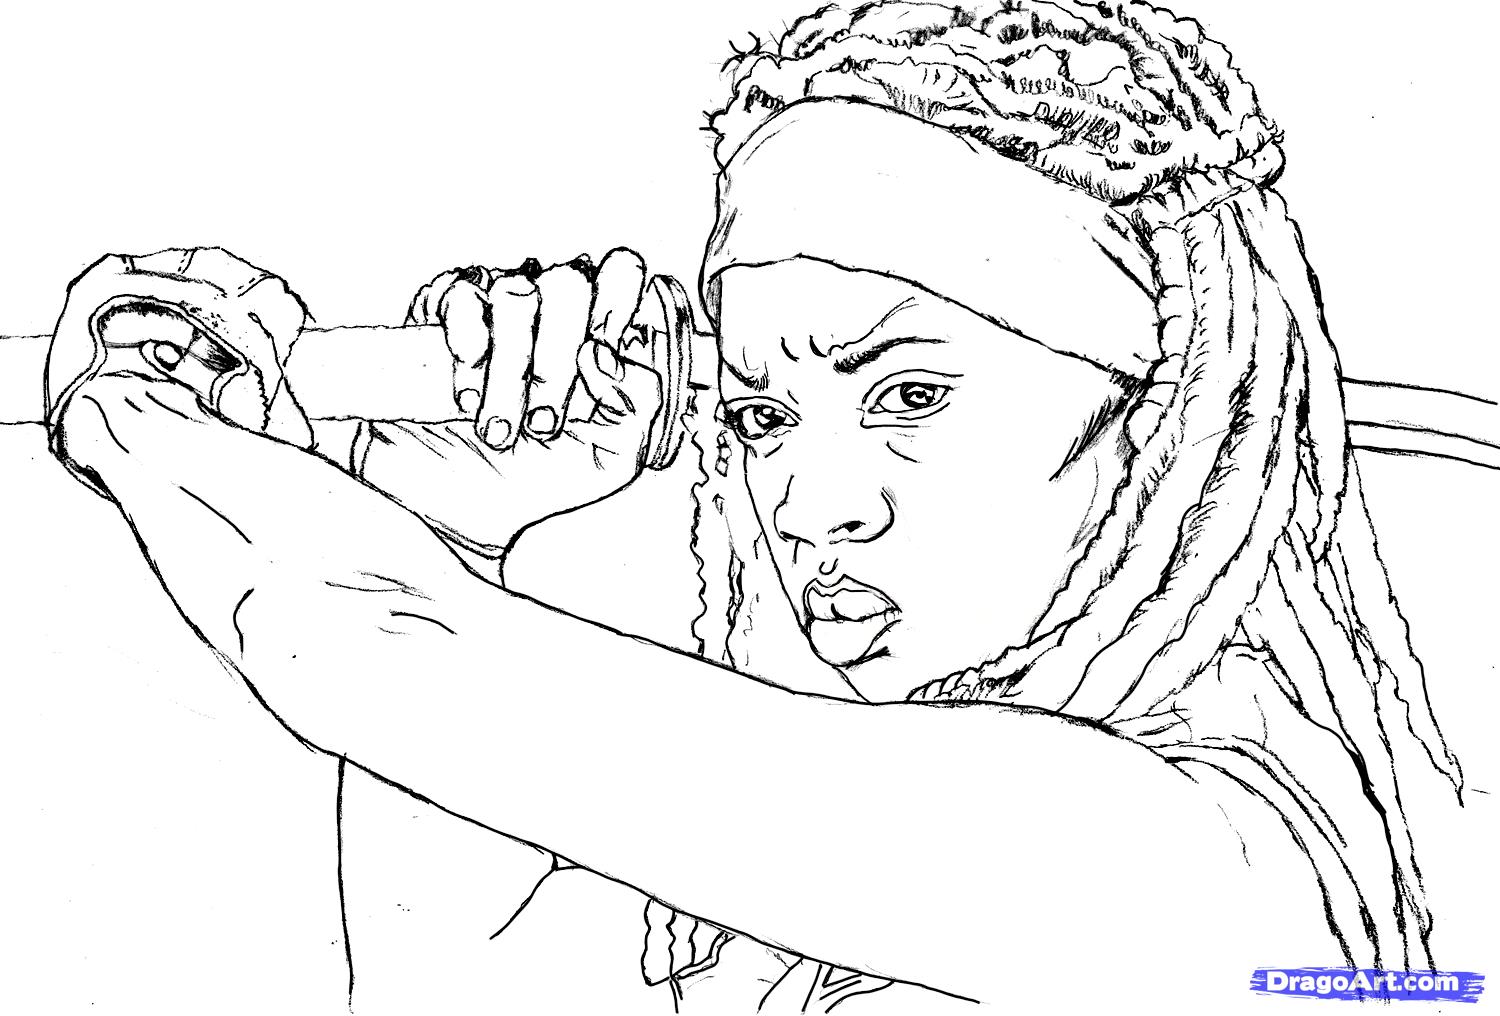 Walking Dead Coloring Pages At GetColorings Free Printable Colorings Pages To Print And Color